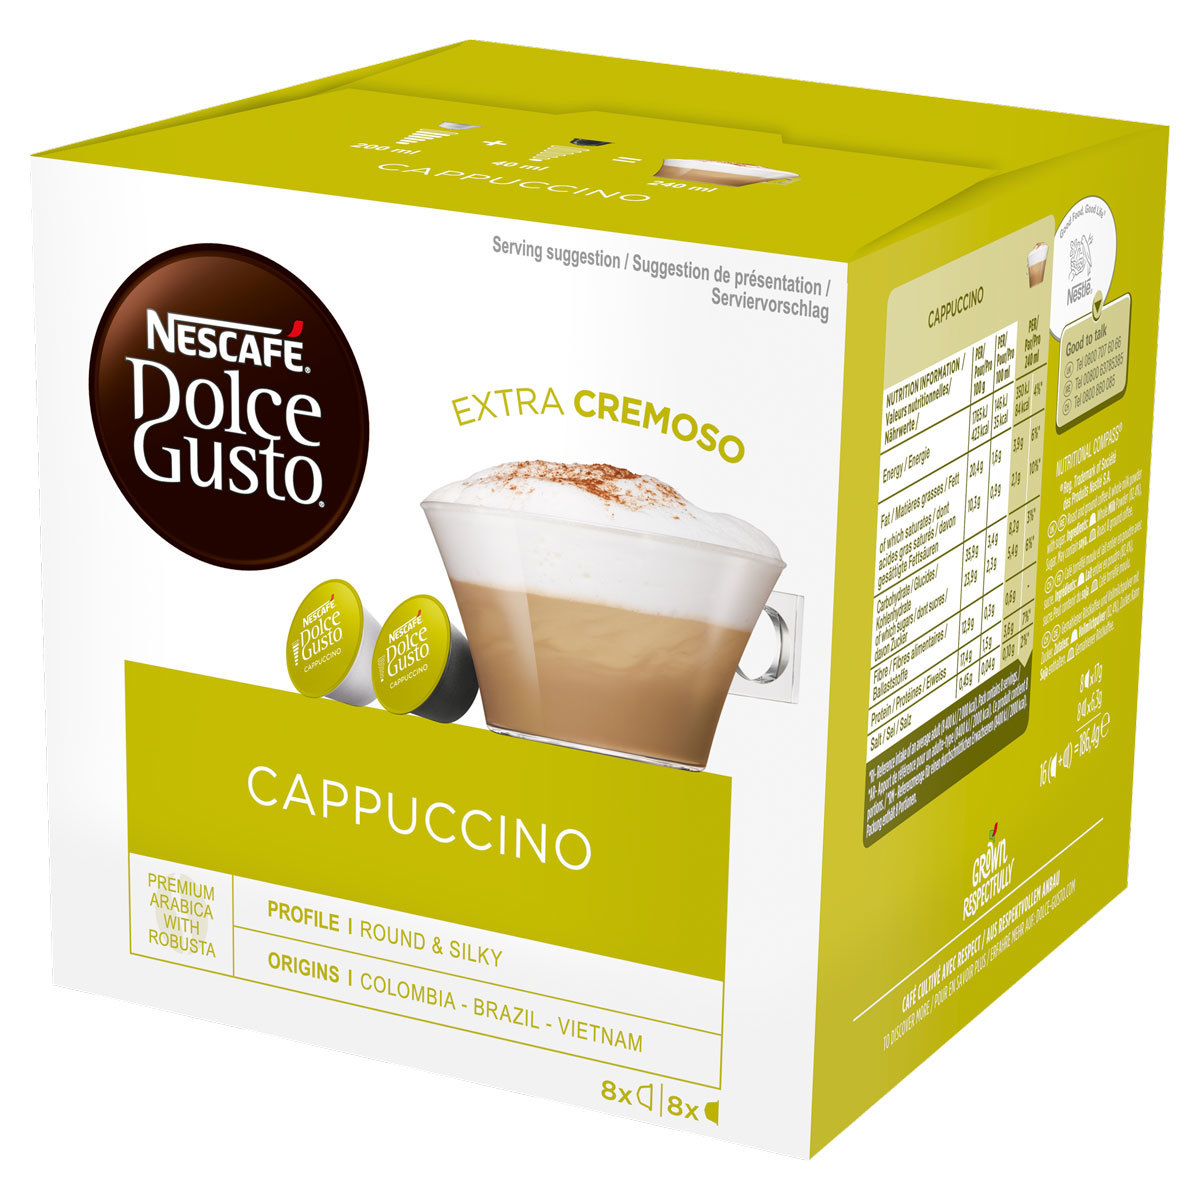 Nescafe Dolce Gusto Cappuccino Coffee Pods - ASDA Groceries